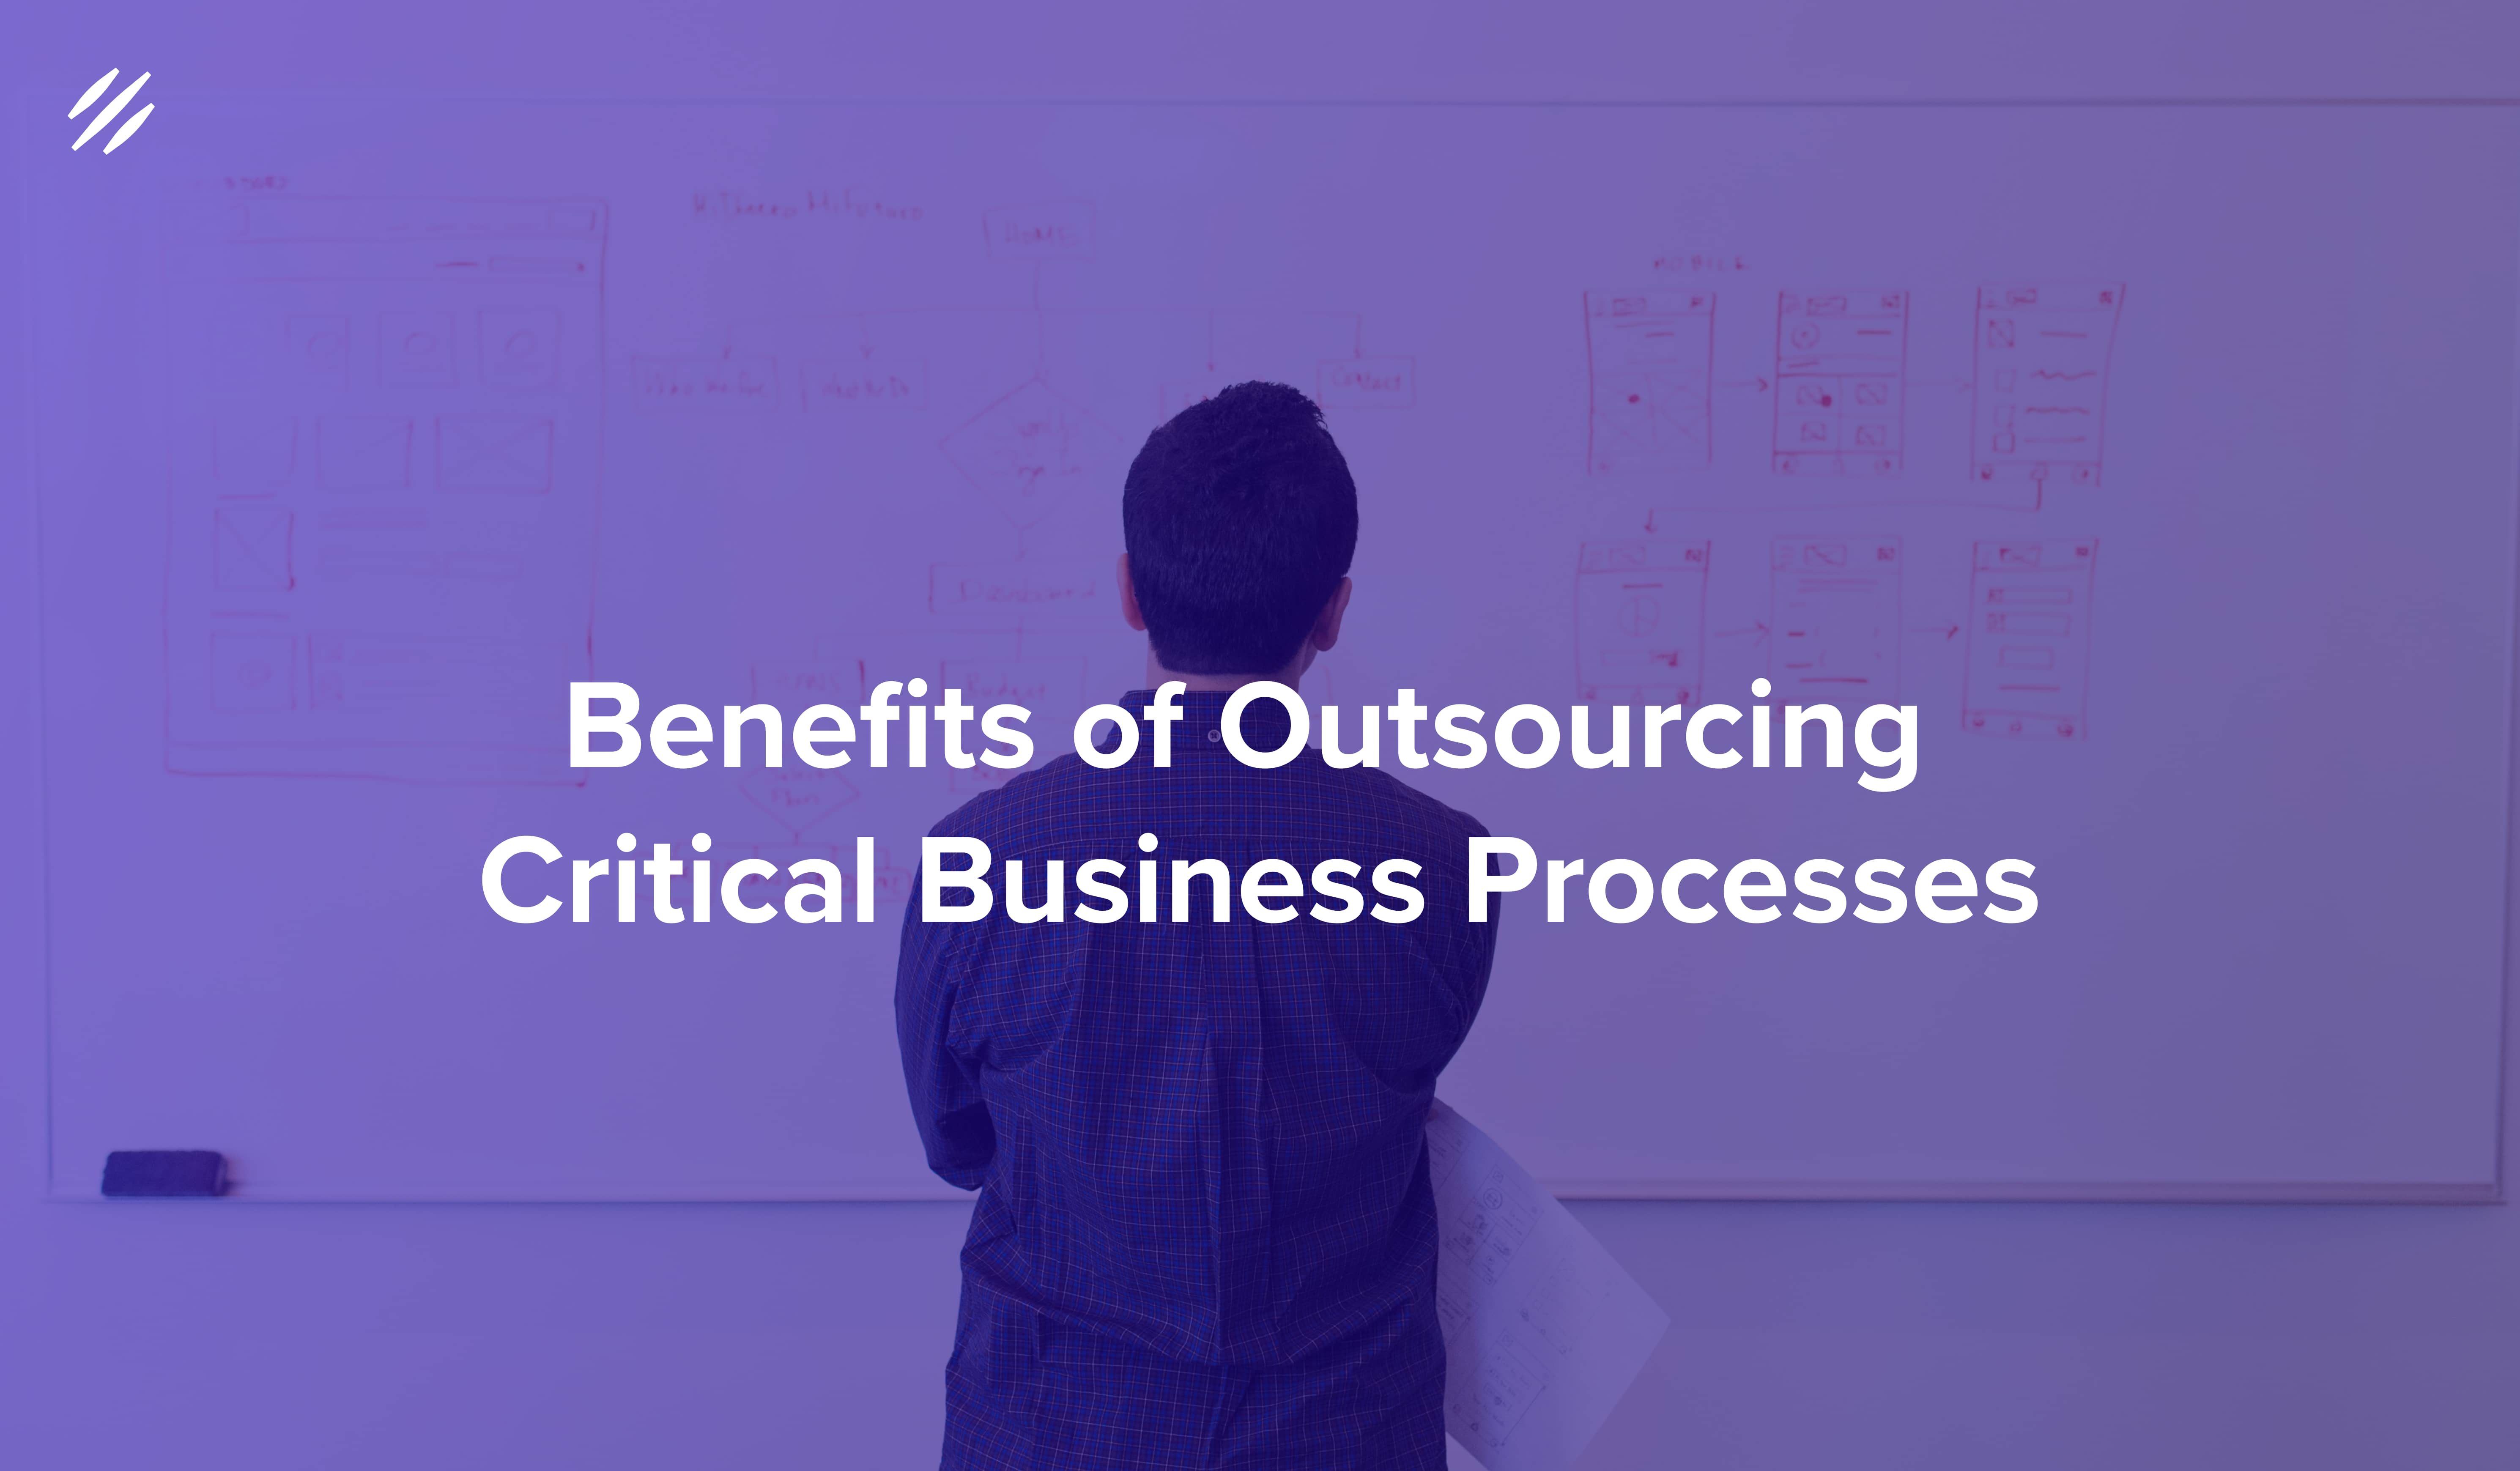 5 Amazing Benefits of Outsourcing Critical Business Processes